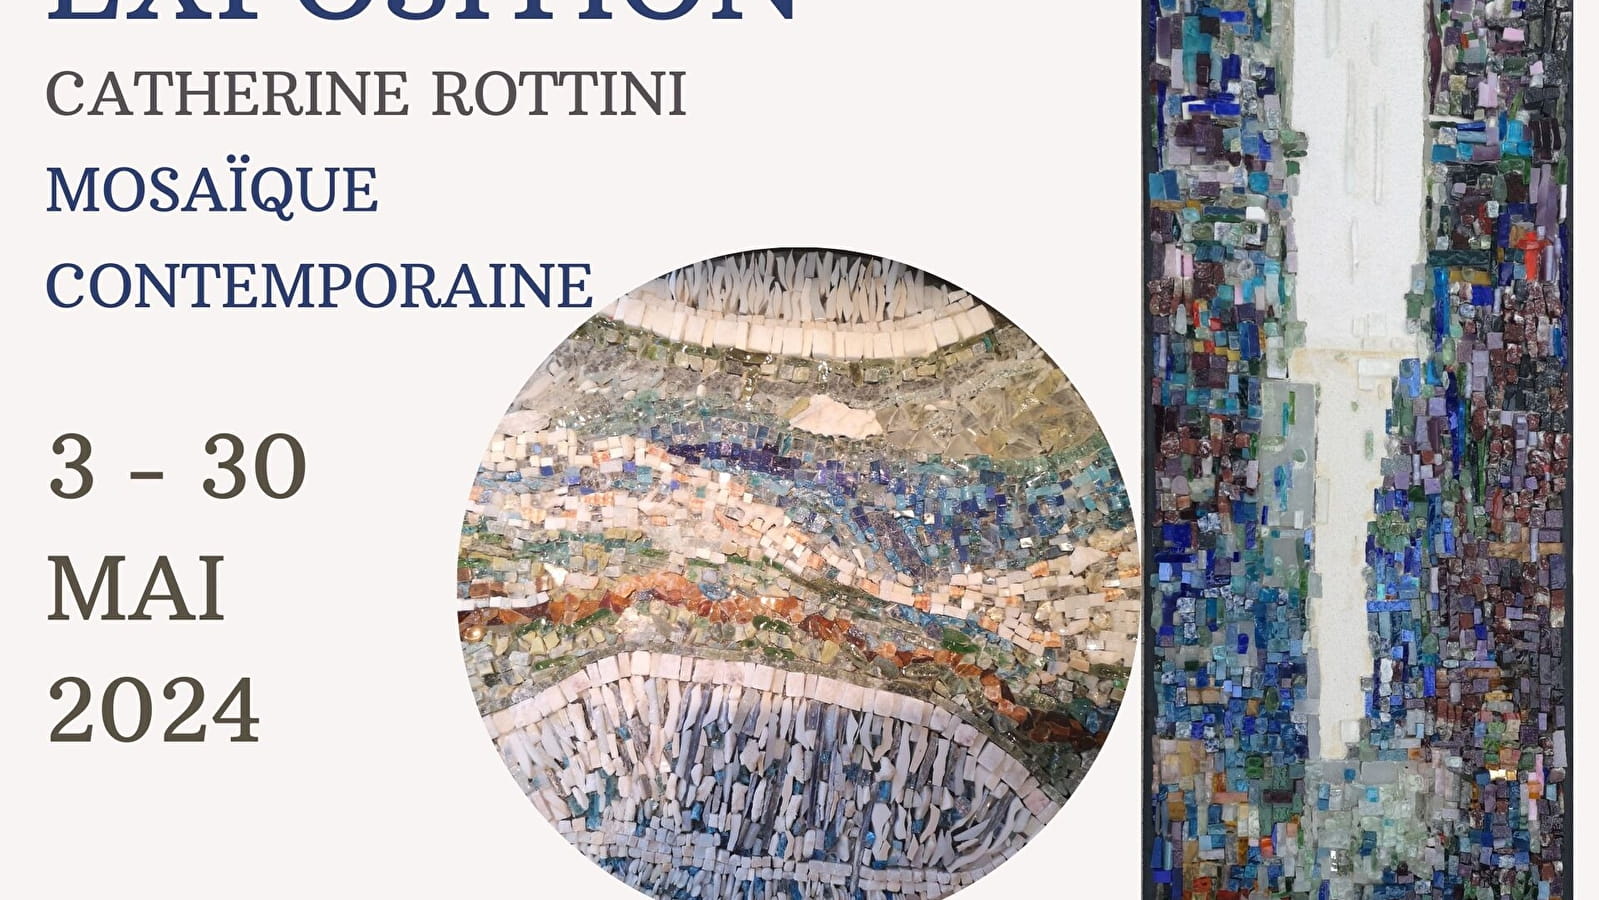 Exhibition of contemporary mosaics by Catherine ROTTINI